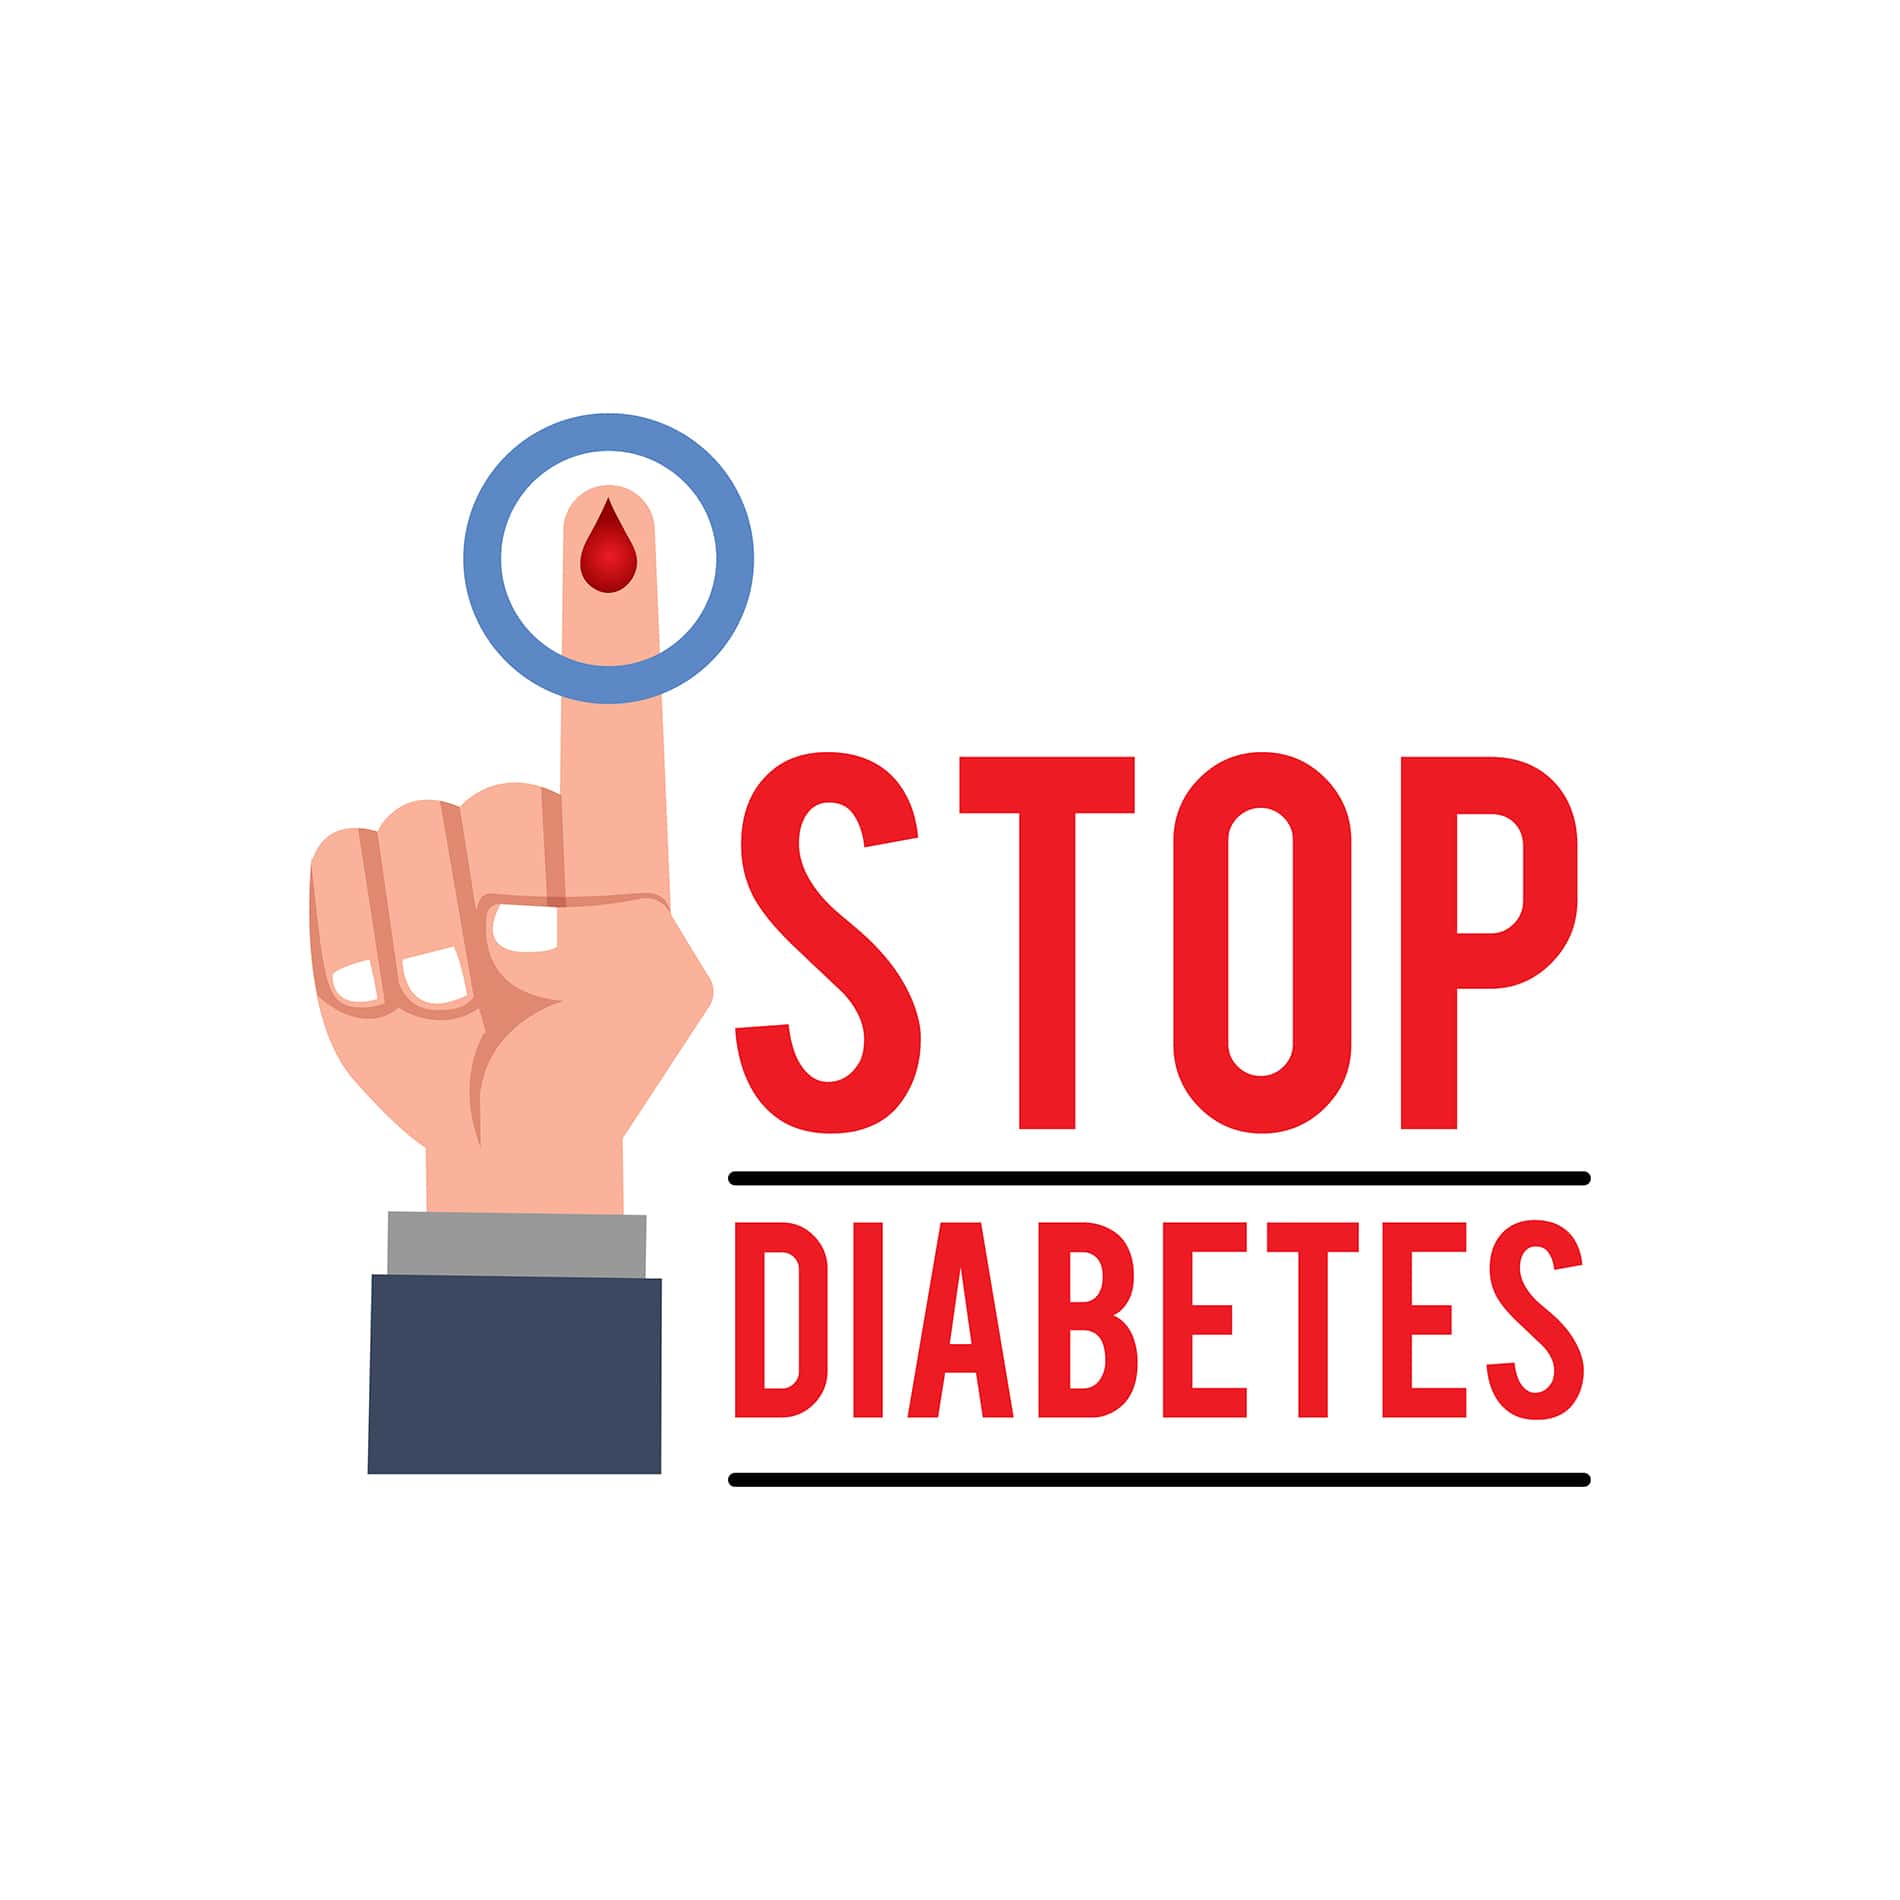 Stop diabetes poster concept vector graphics for free download